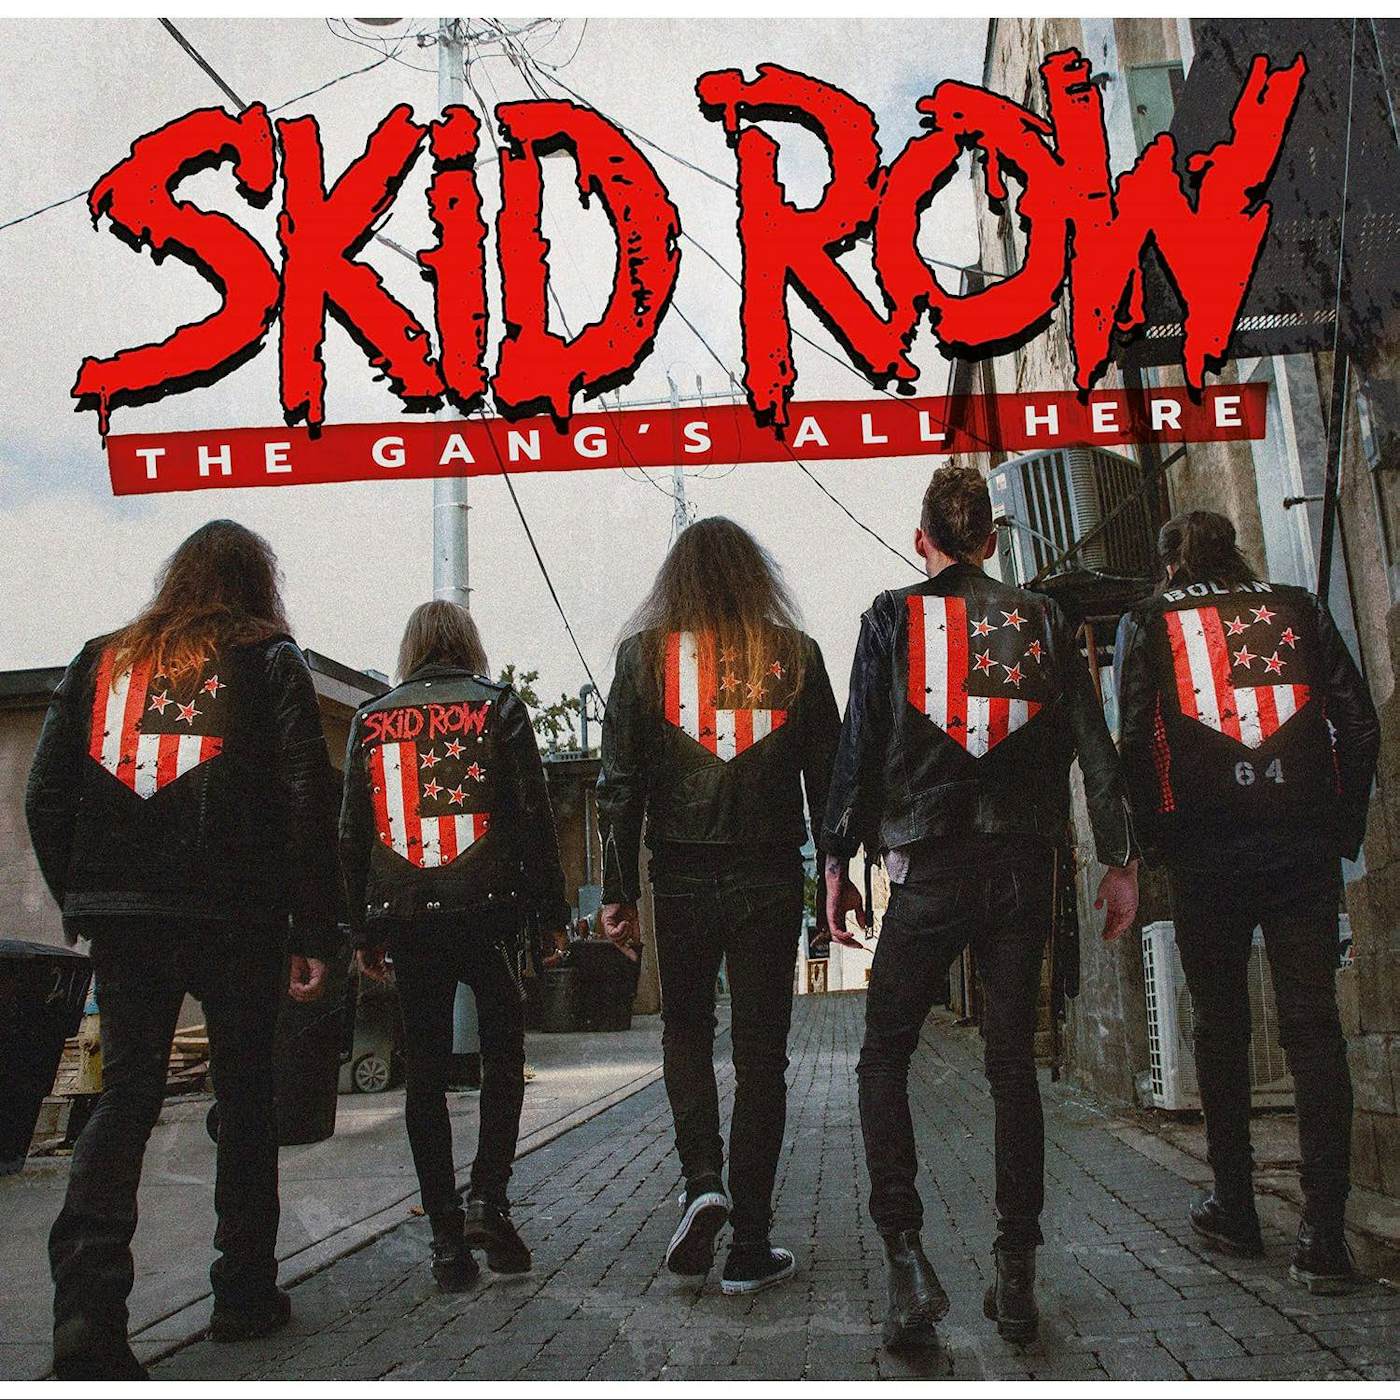 Skid Row The Gang's All Here Vinyl Record